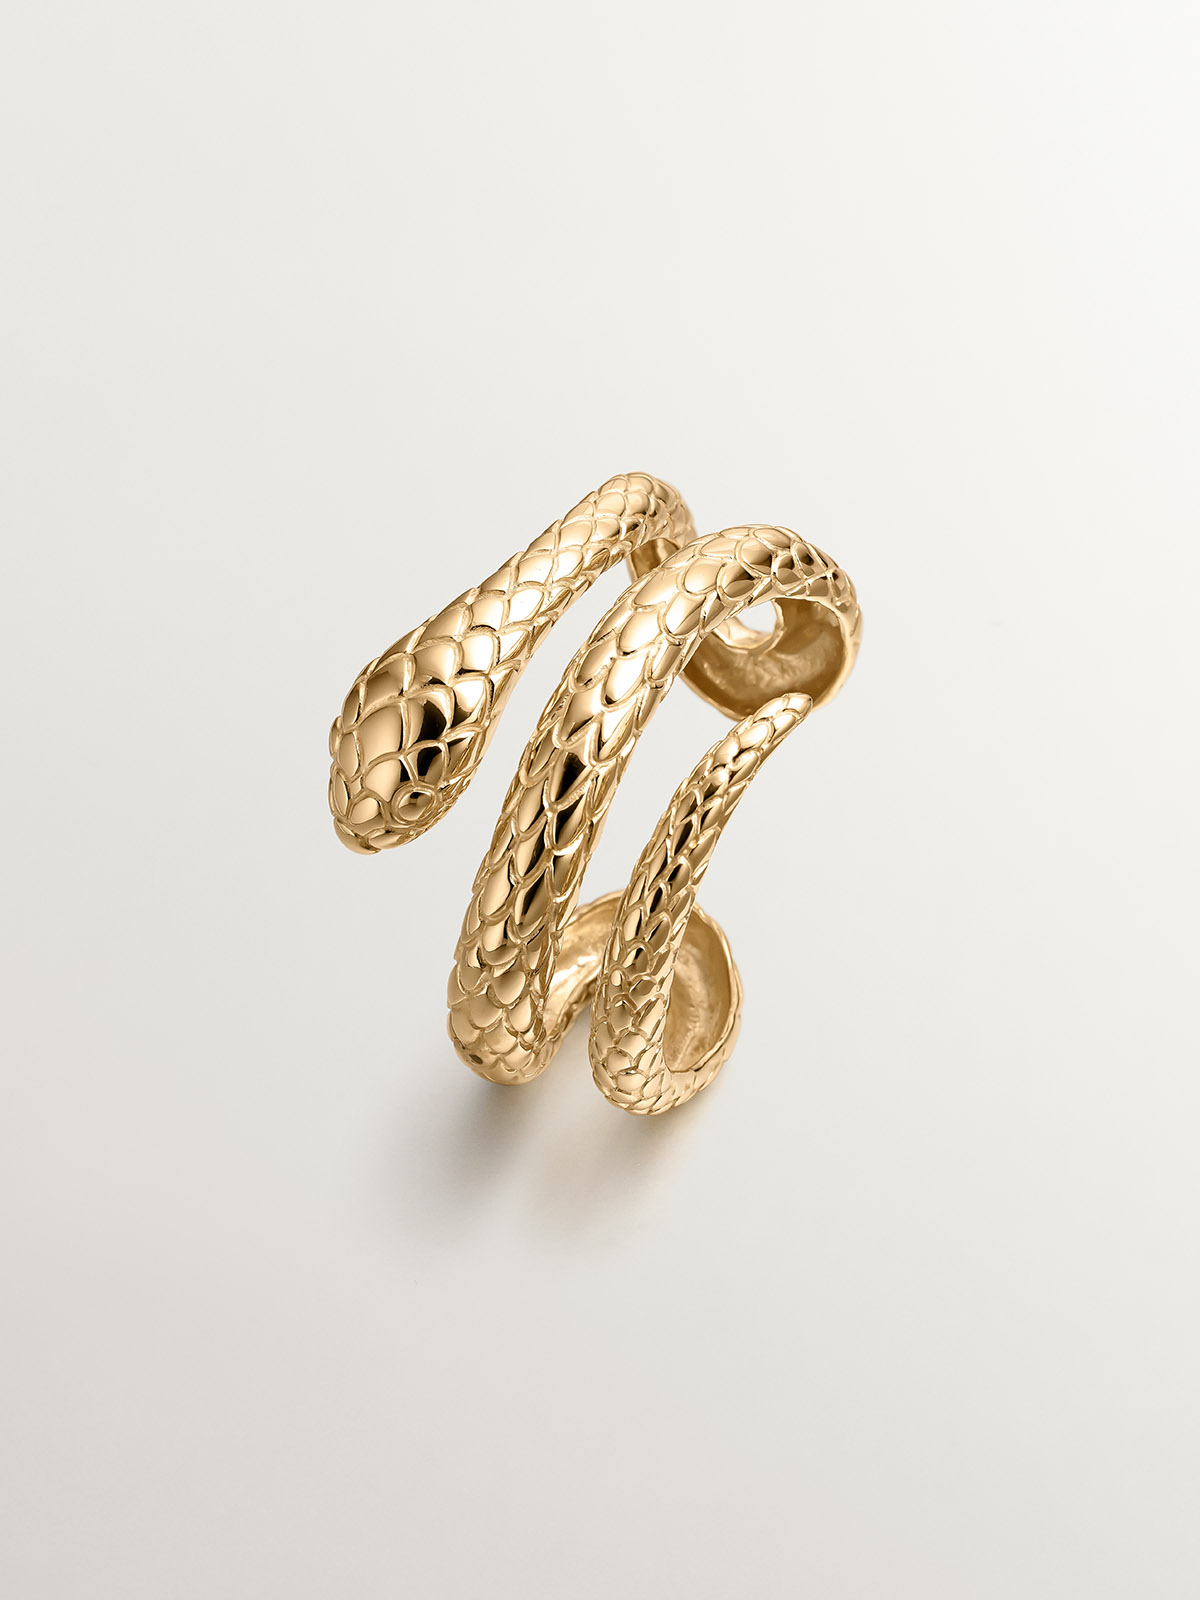 Rigid bracelet made of 925 silver, covered in 18K yellow gold, with a snake shape.